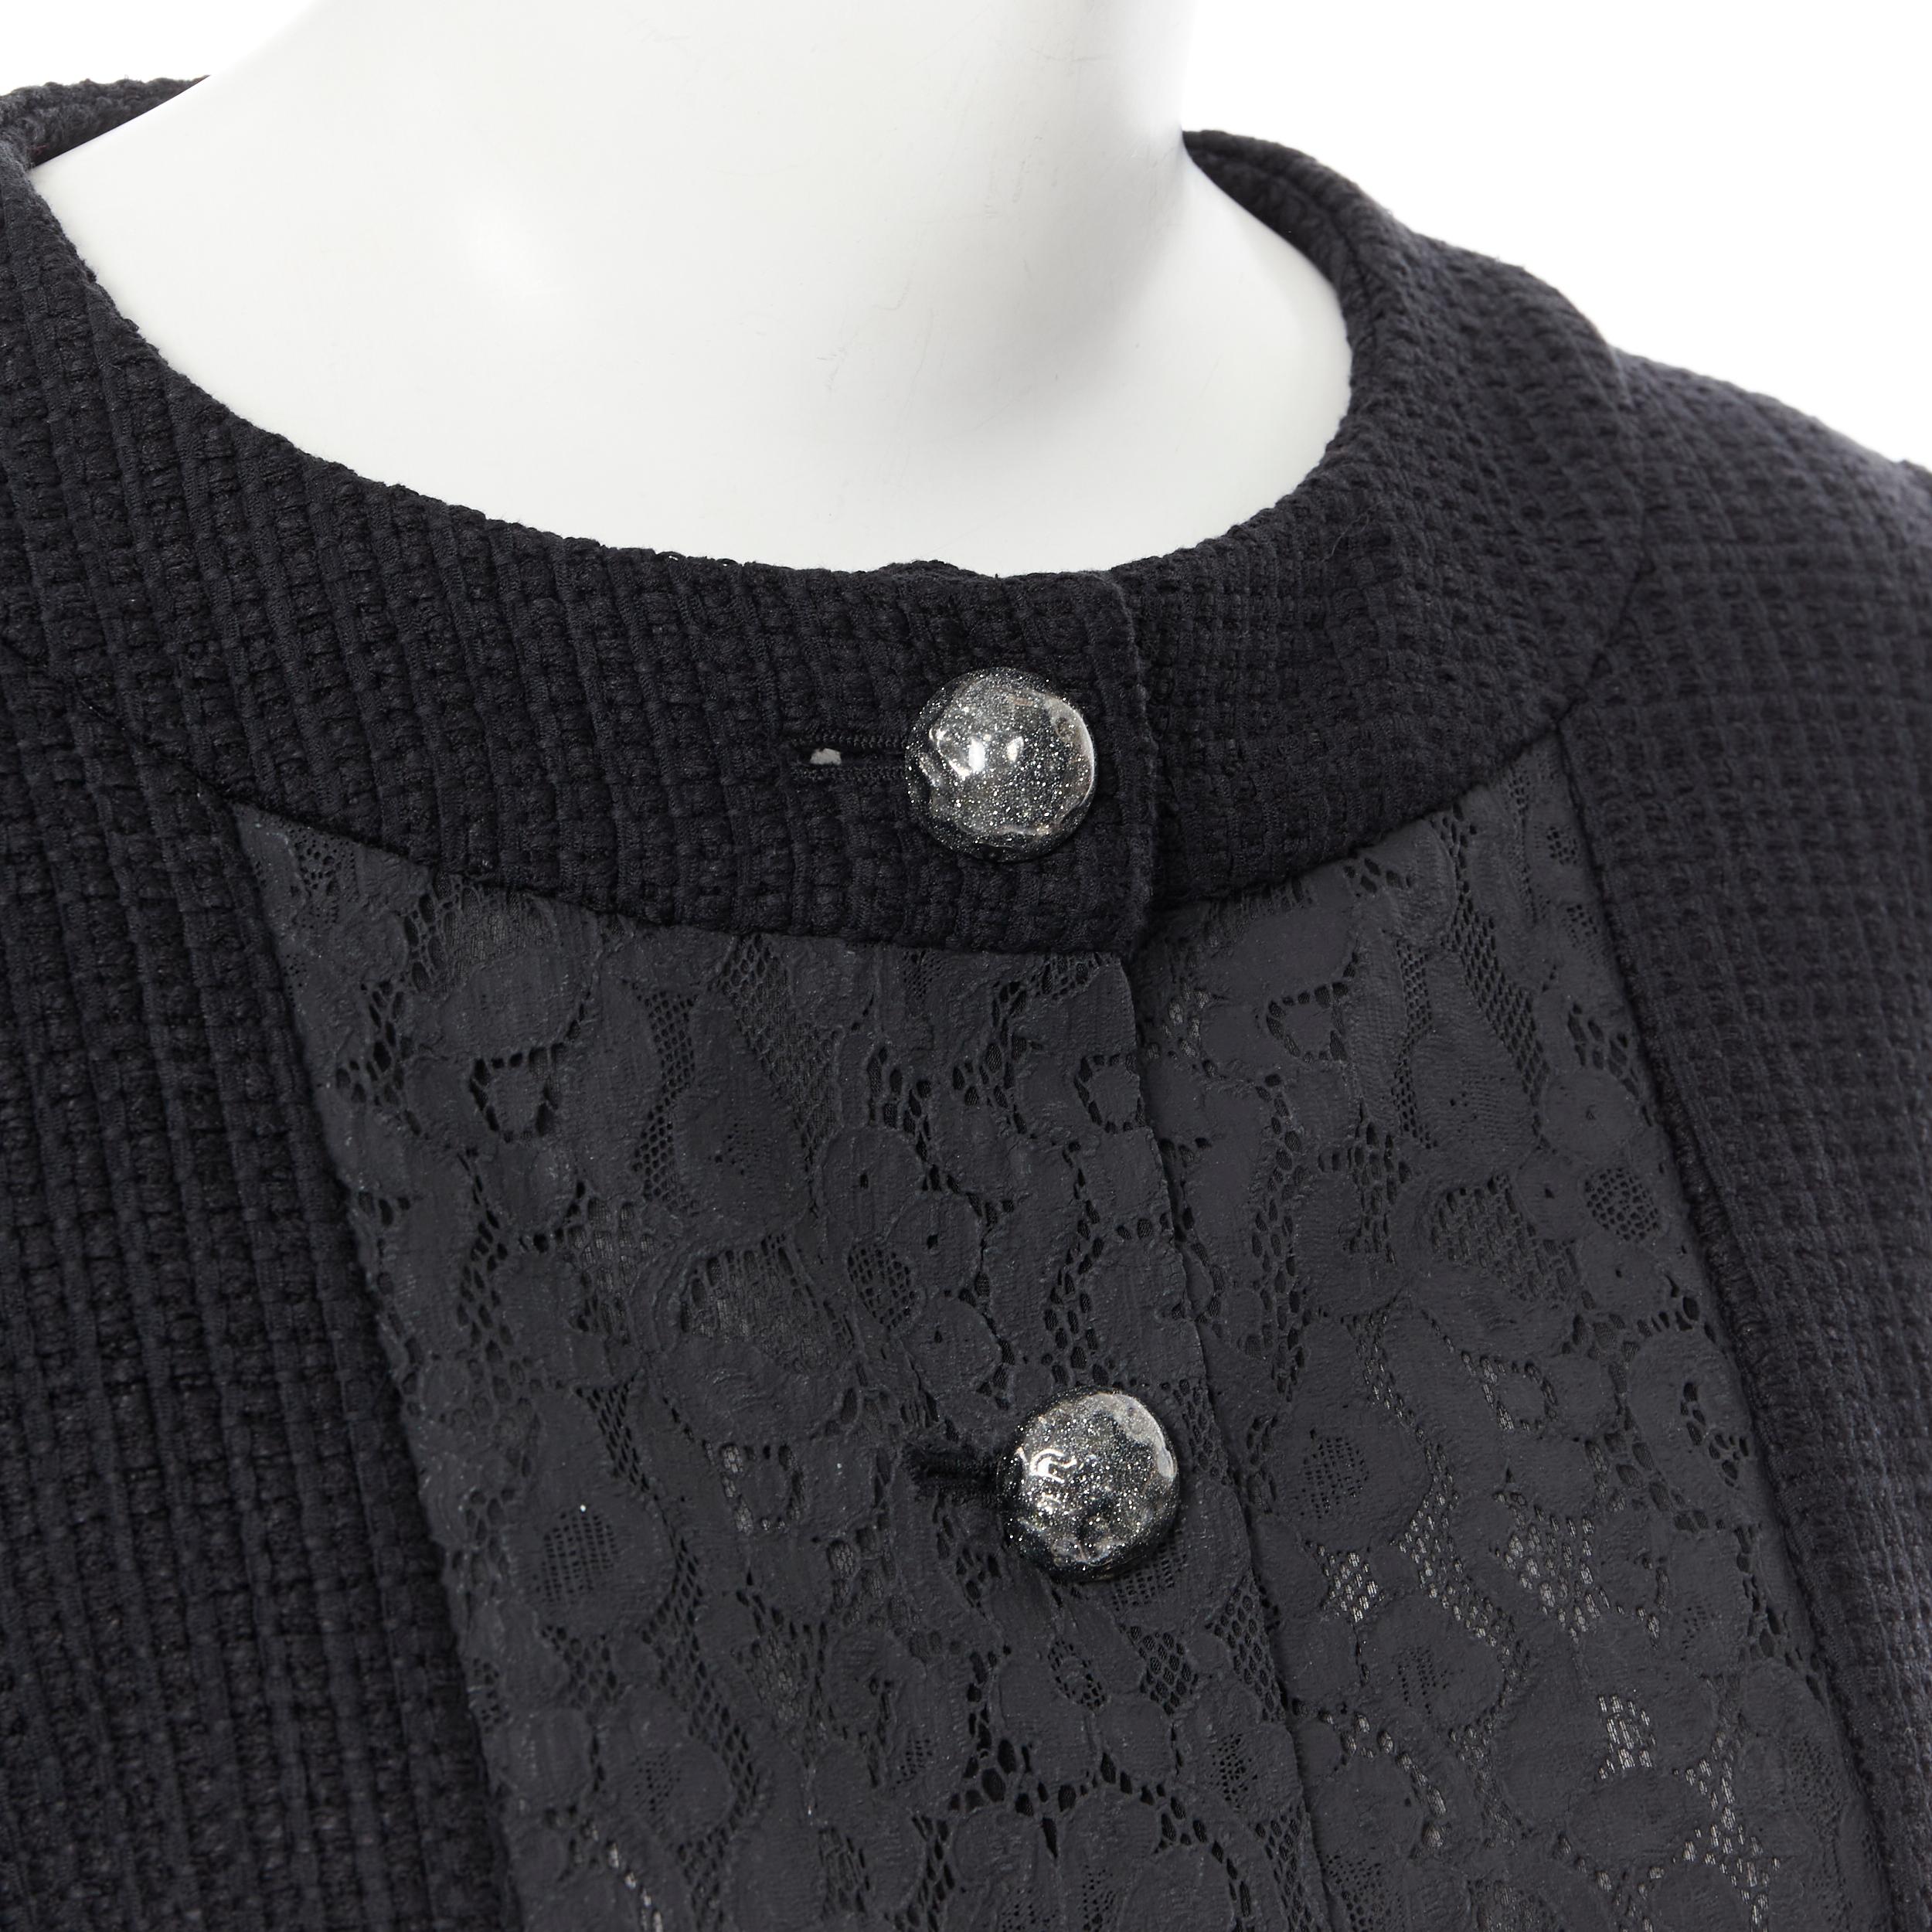 CHANEL black asymmetric lace panel pearl button lattice tweed black jacket FR40 Reference: TGAS/B00152 Brand: Chanel Designer: Karl Lagerfeld Material: Tweed Color: Black Pattern: Solid Closure: Button Extra Detail: Collarless. Asymmetric floral